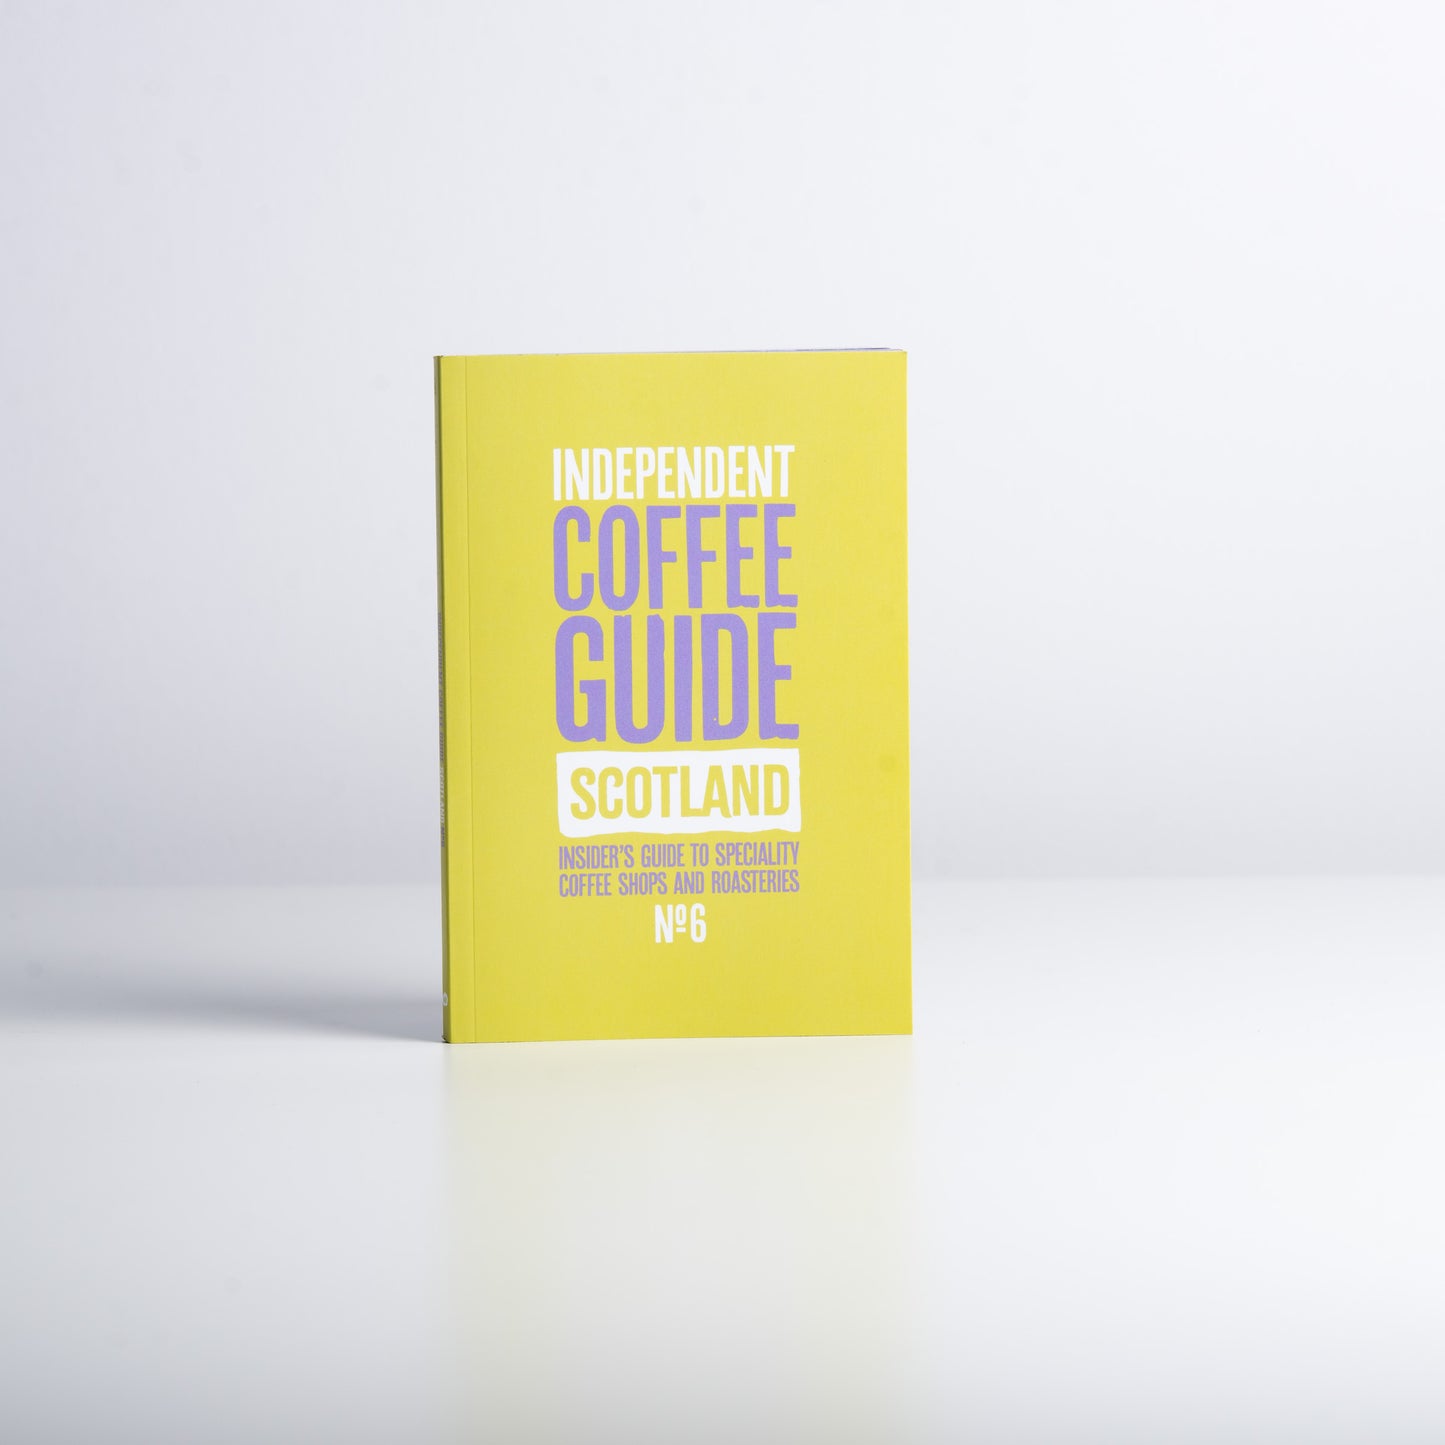 Independent Coffee Guide – Scotland